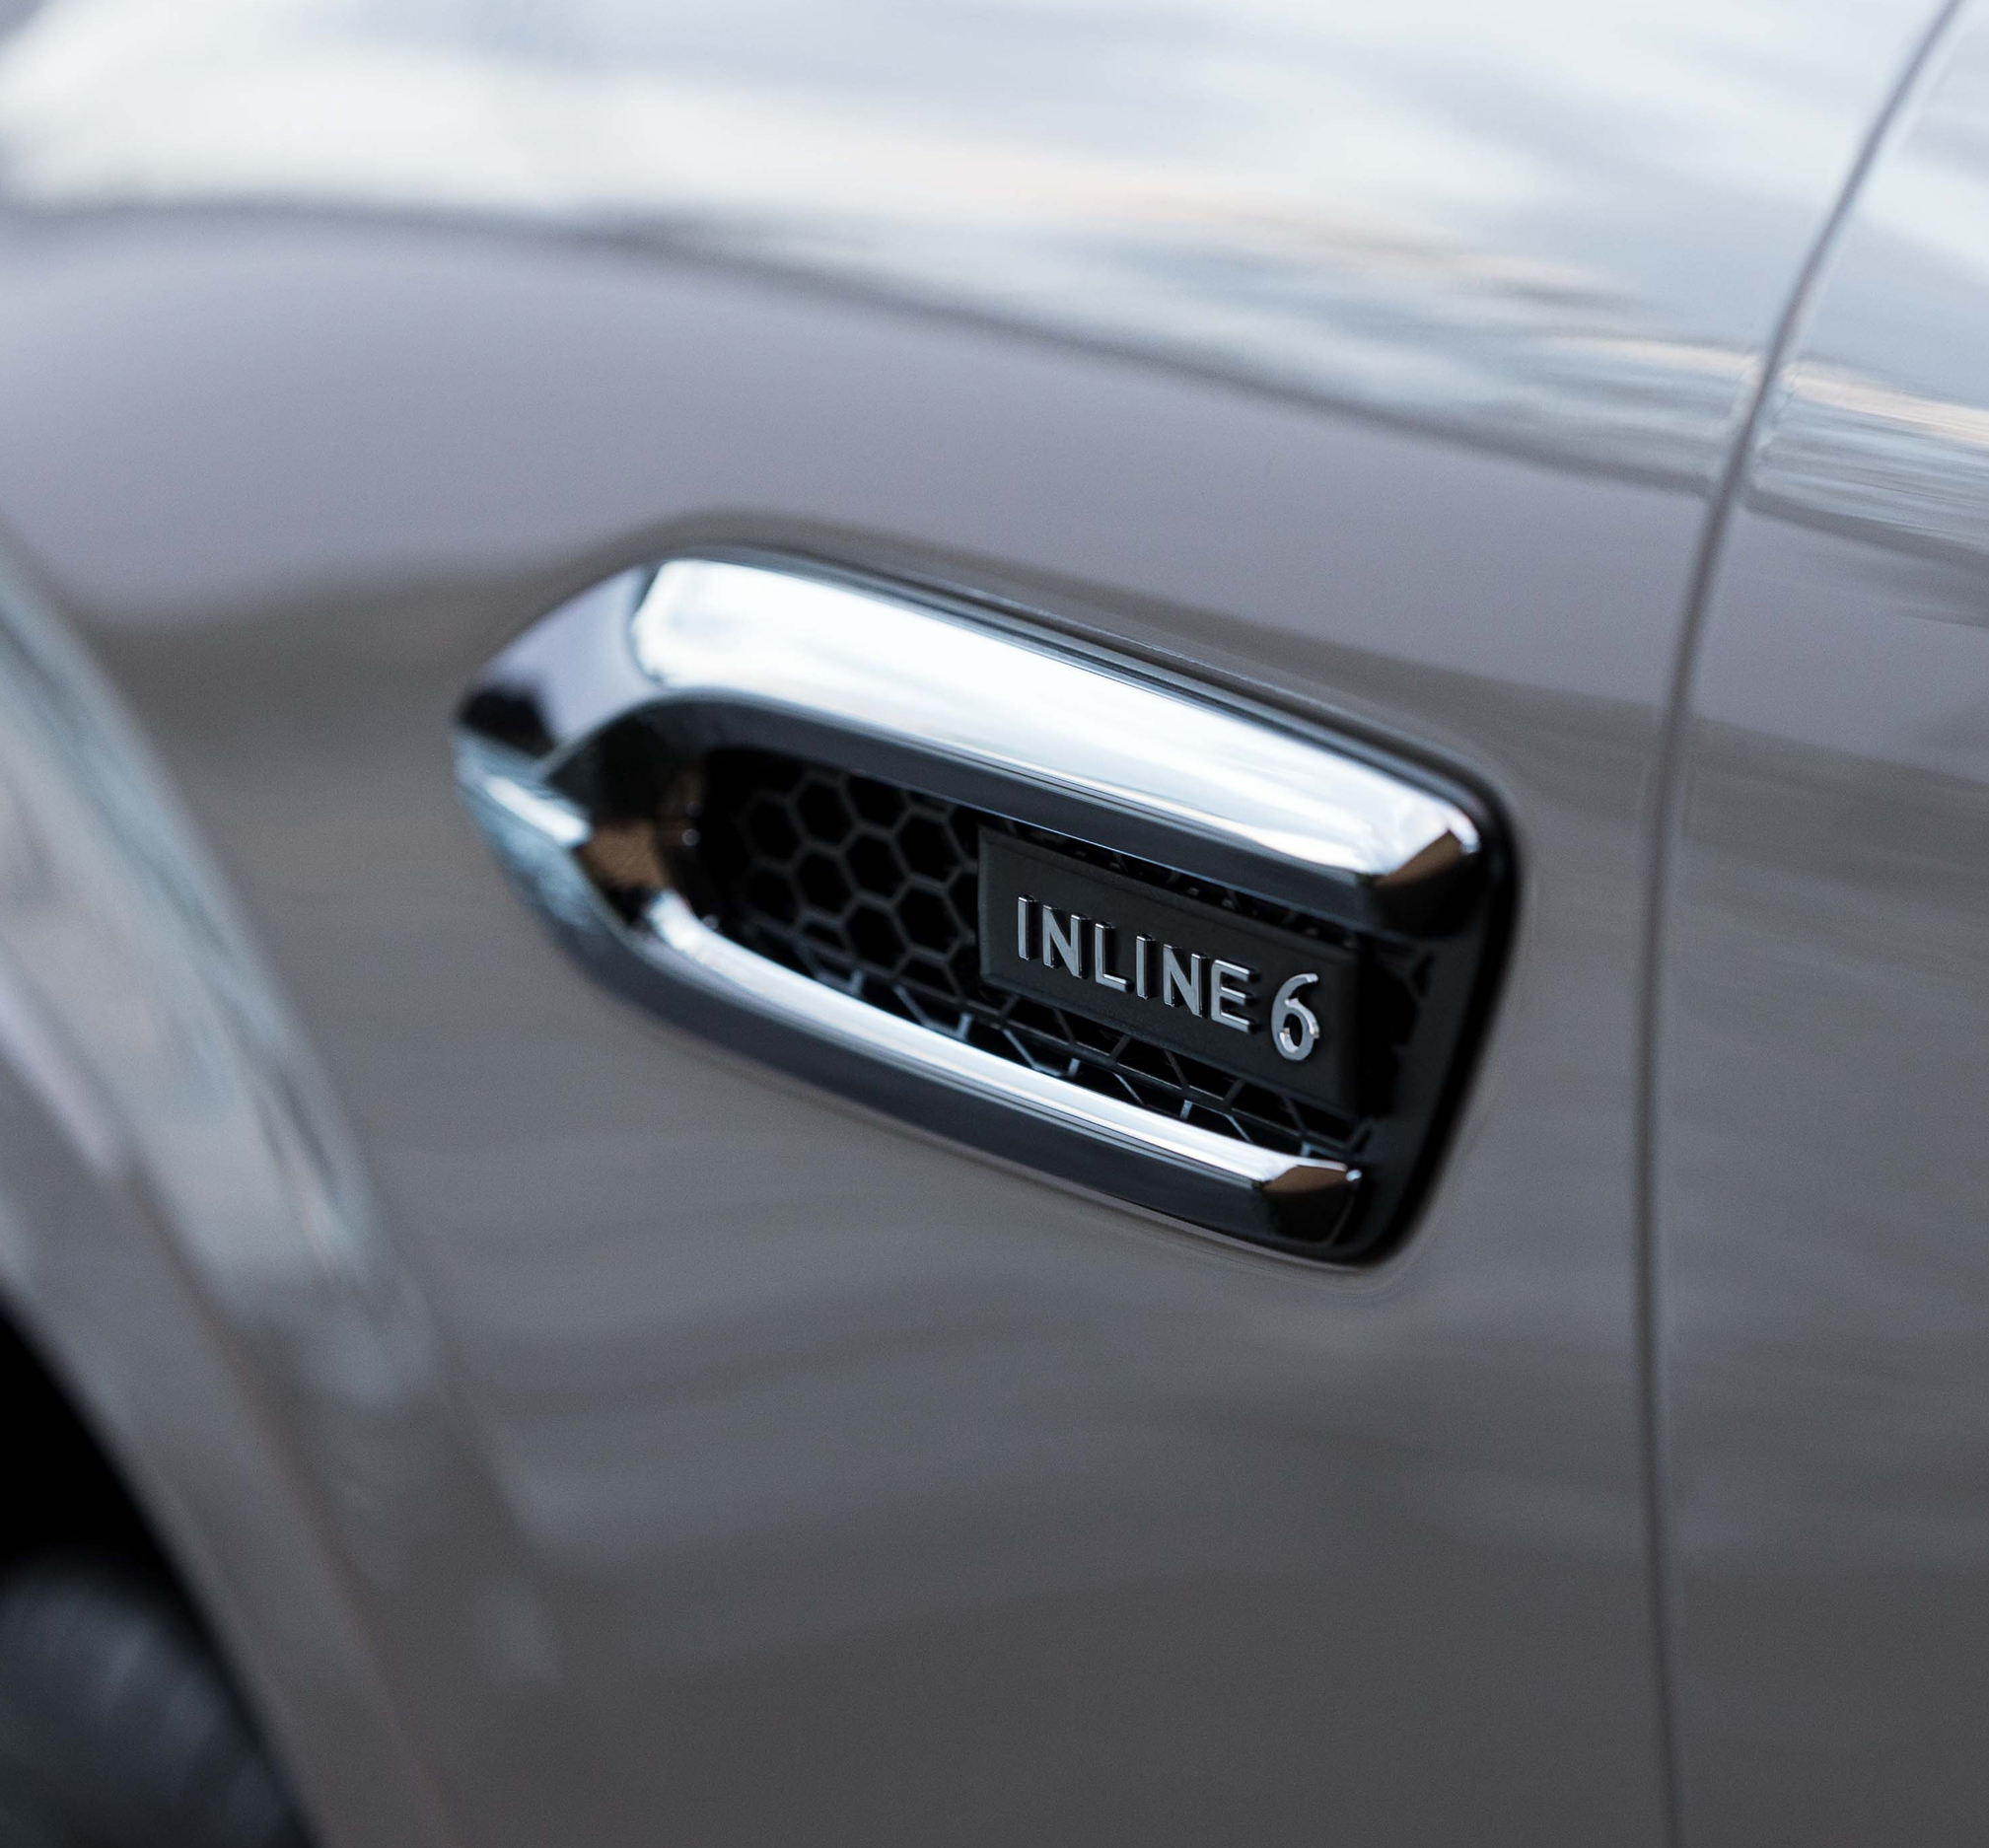 Diesel Inline-6 badge on the side of the Mazda CX-60.